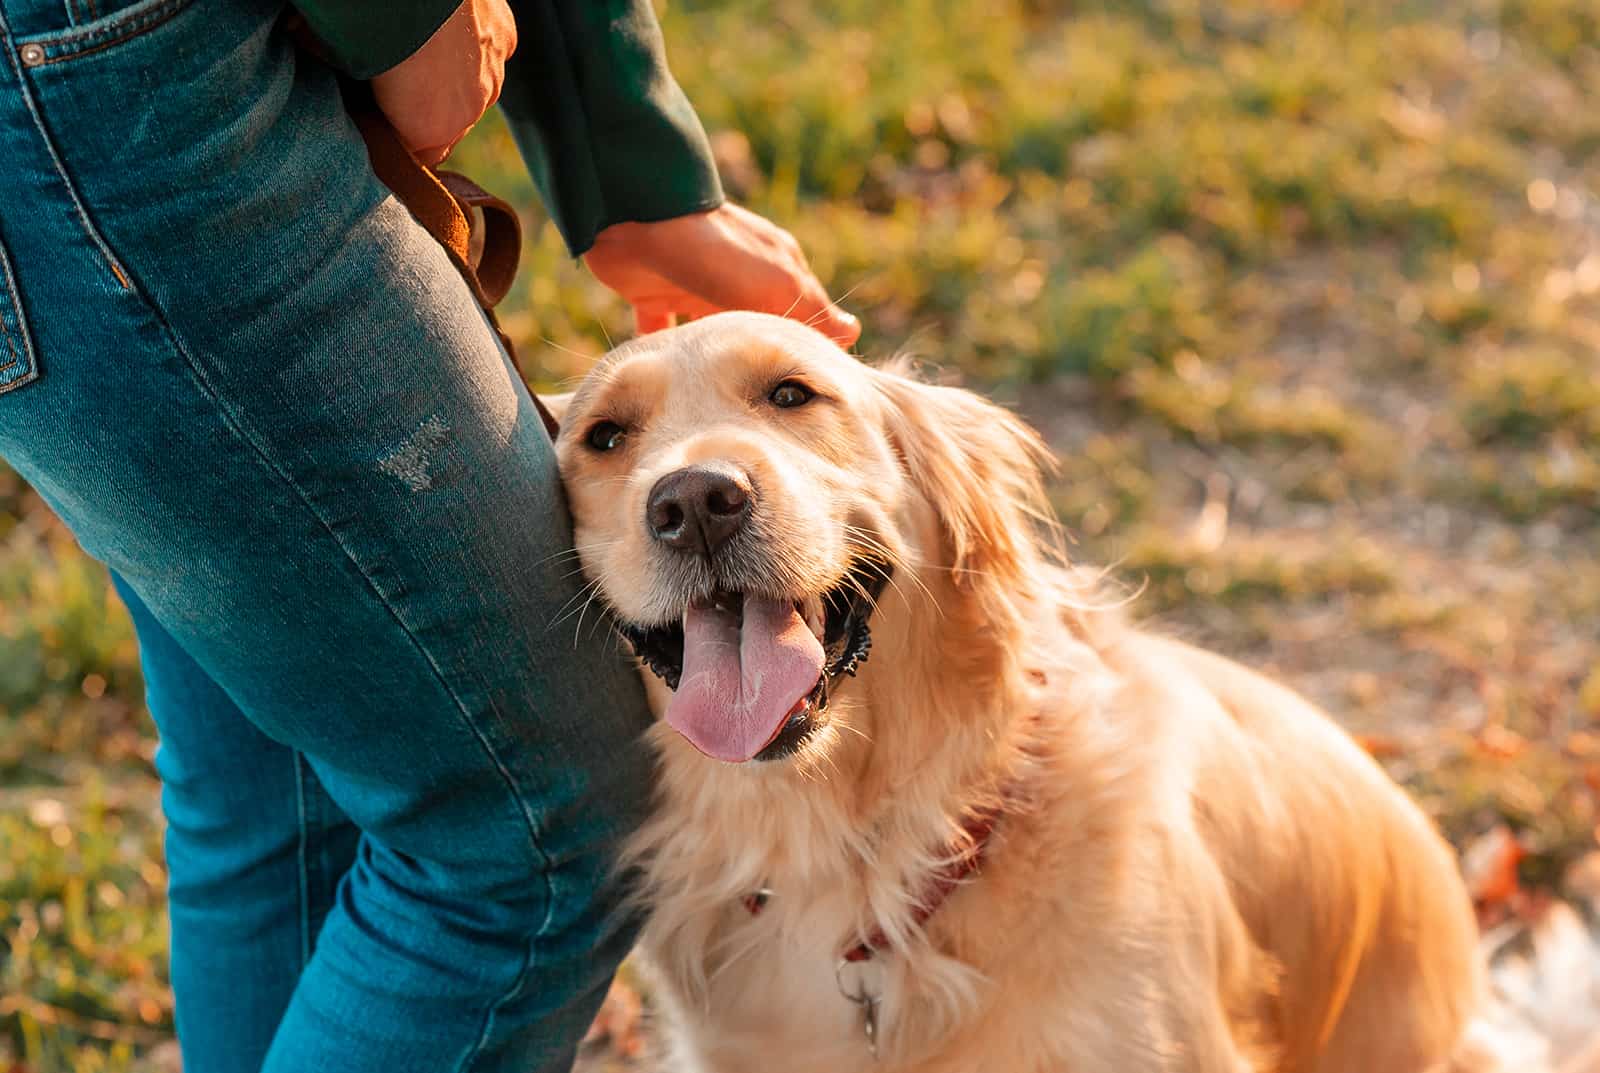 a person cuddling golden retriever dog with hand